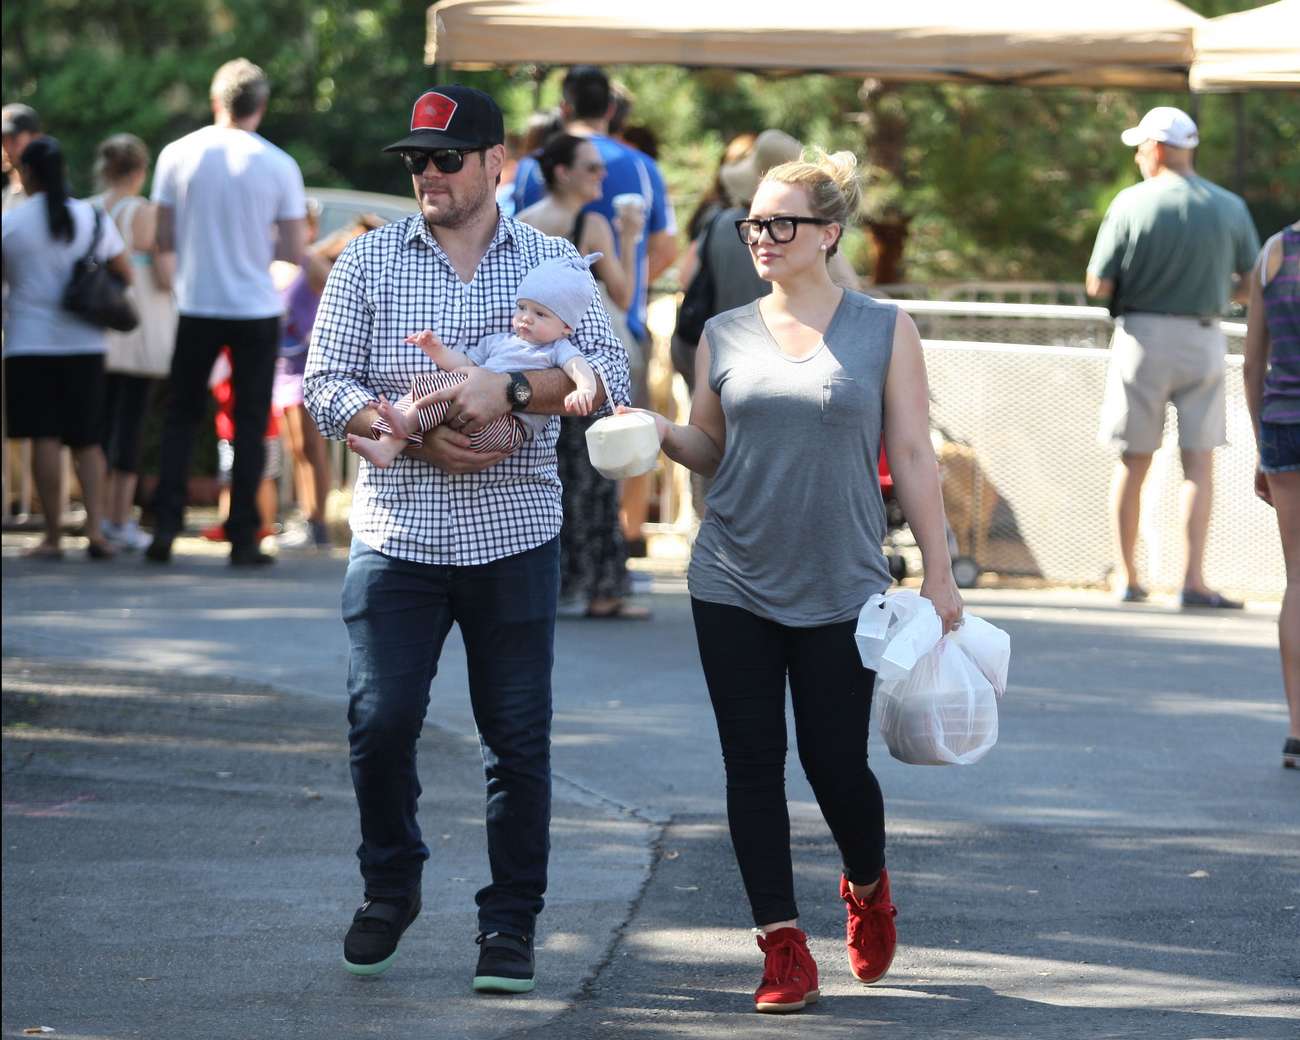 Hilary Duff - and family at the Farmers Market in Beverly Hills